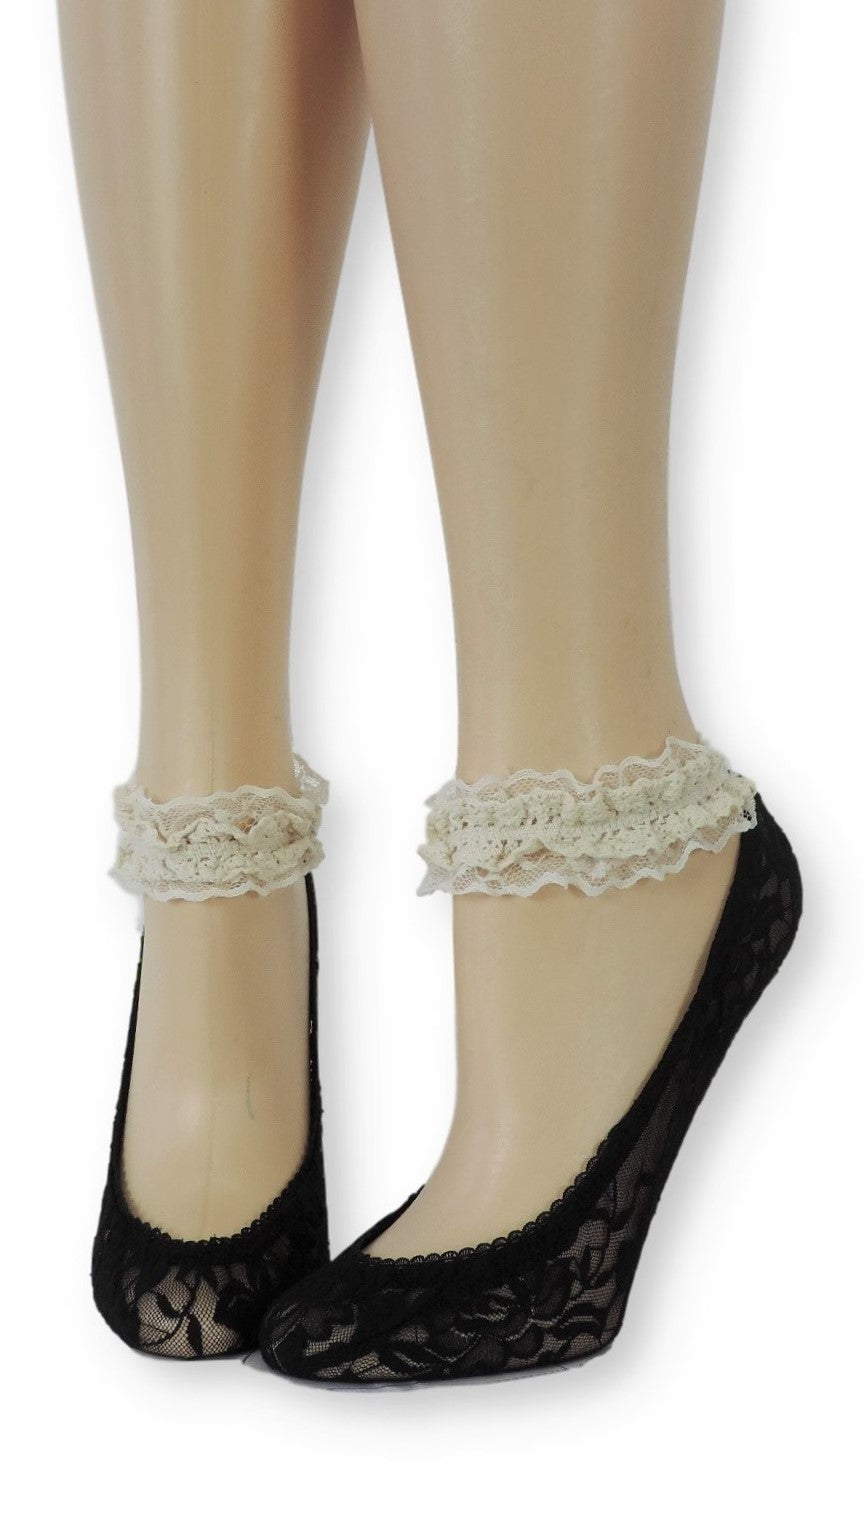 Jade Ankle Mesh Socks with Antique Lace - Global Trendz Fashion®